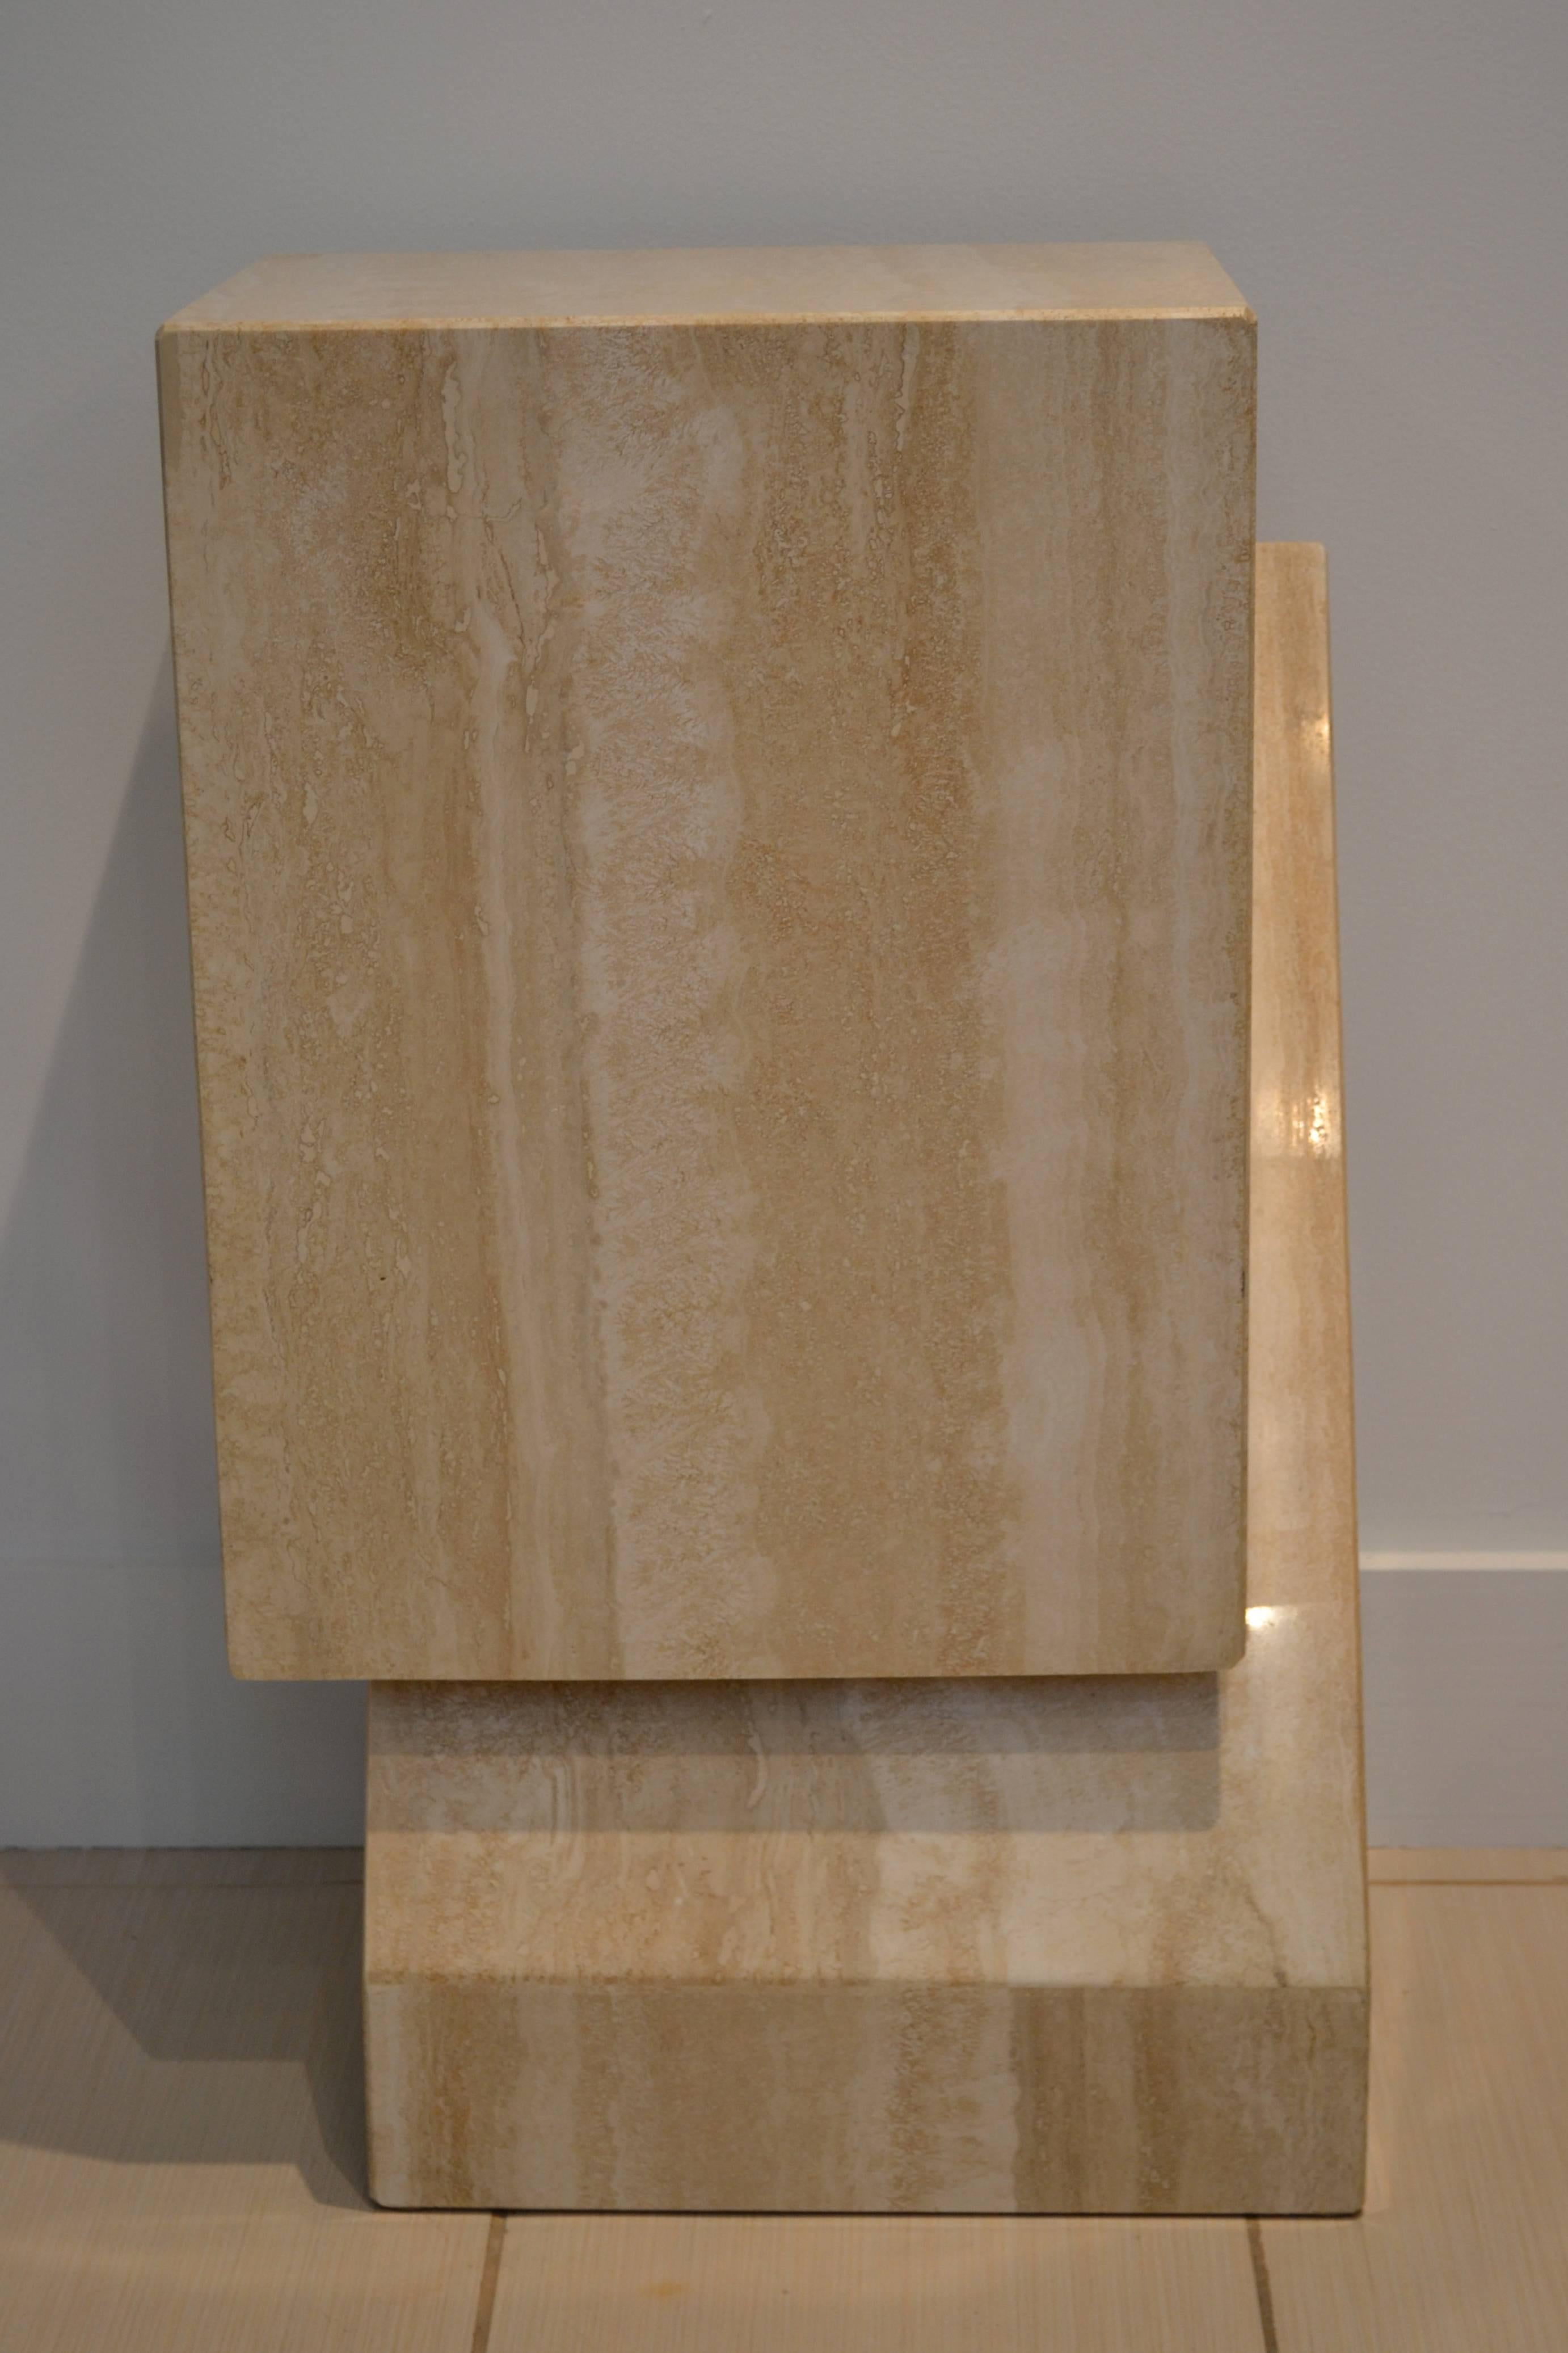 Very cool travertine pedestal or side table that also shows well as a sculpture. Hollow but very heavy, 1990s.